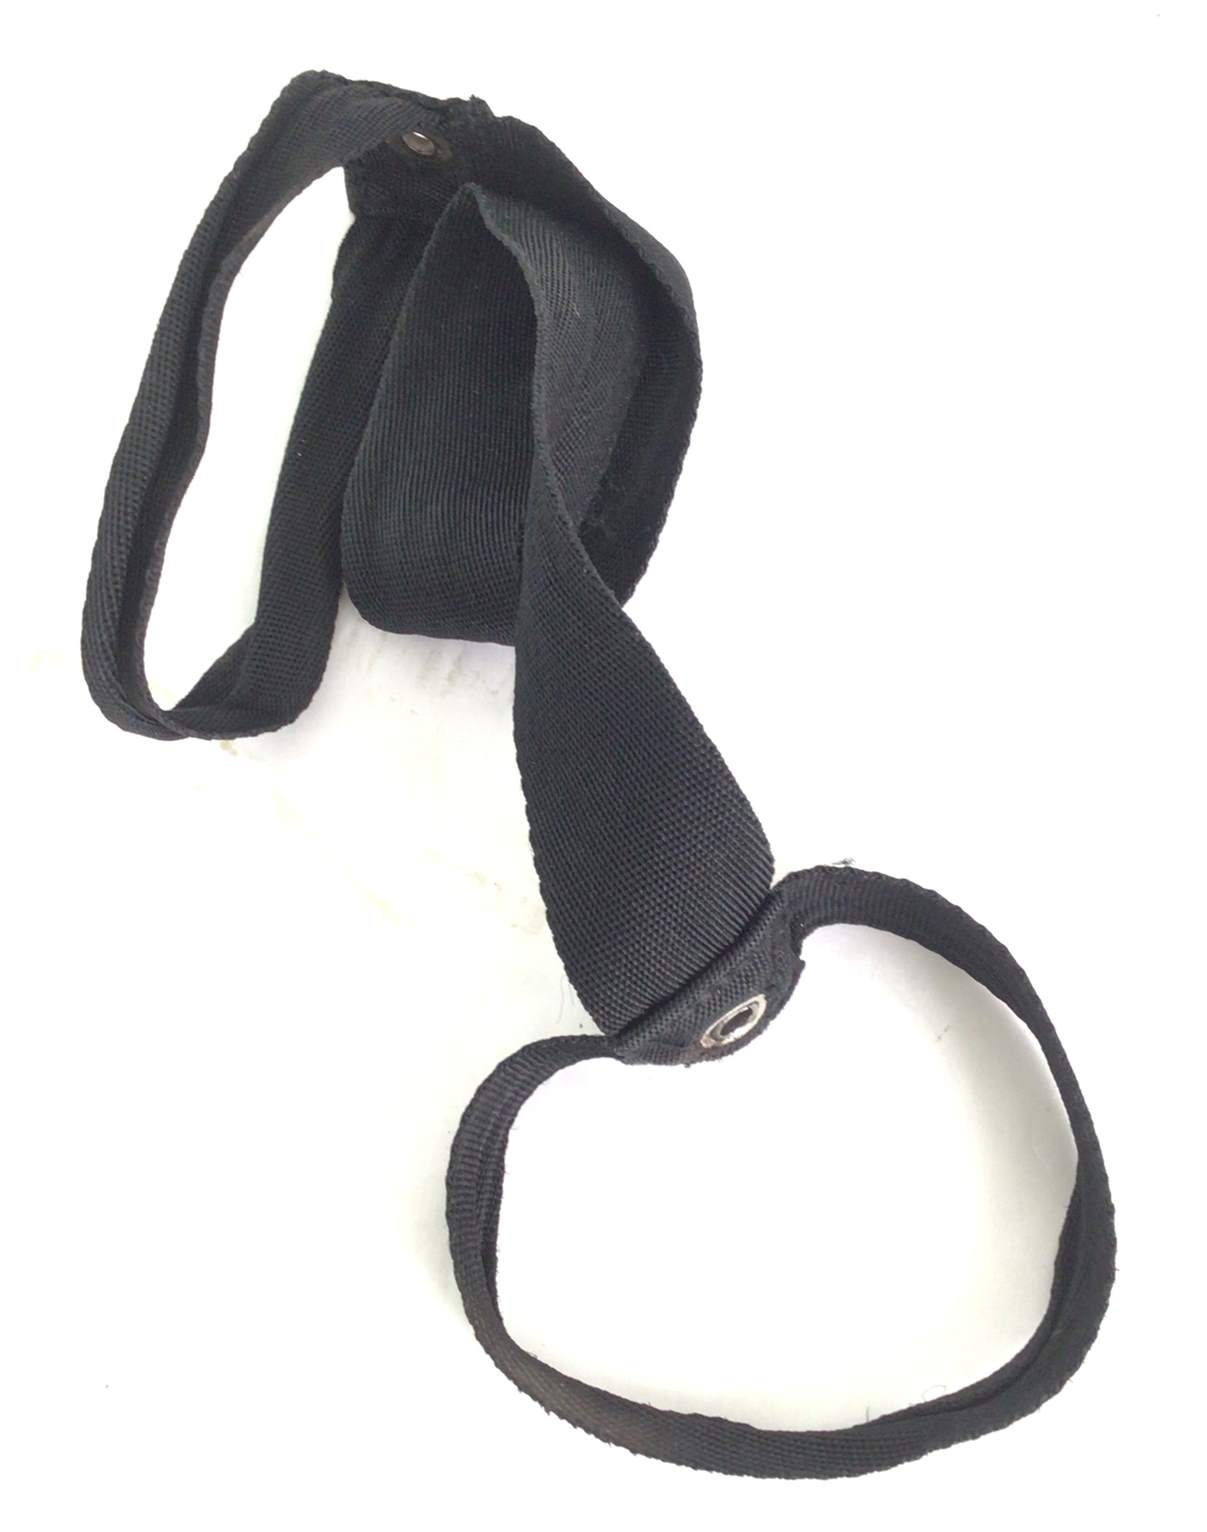 Top Head Strap Assembly (Used)